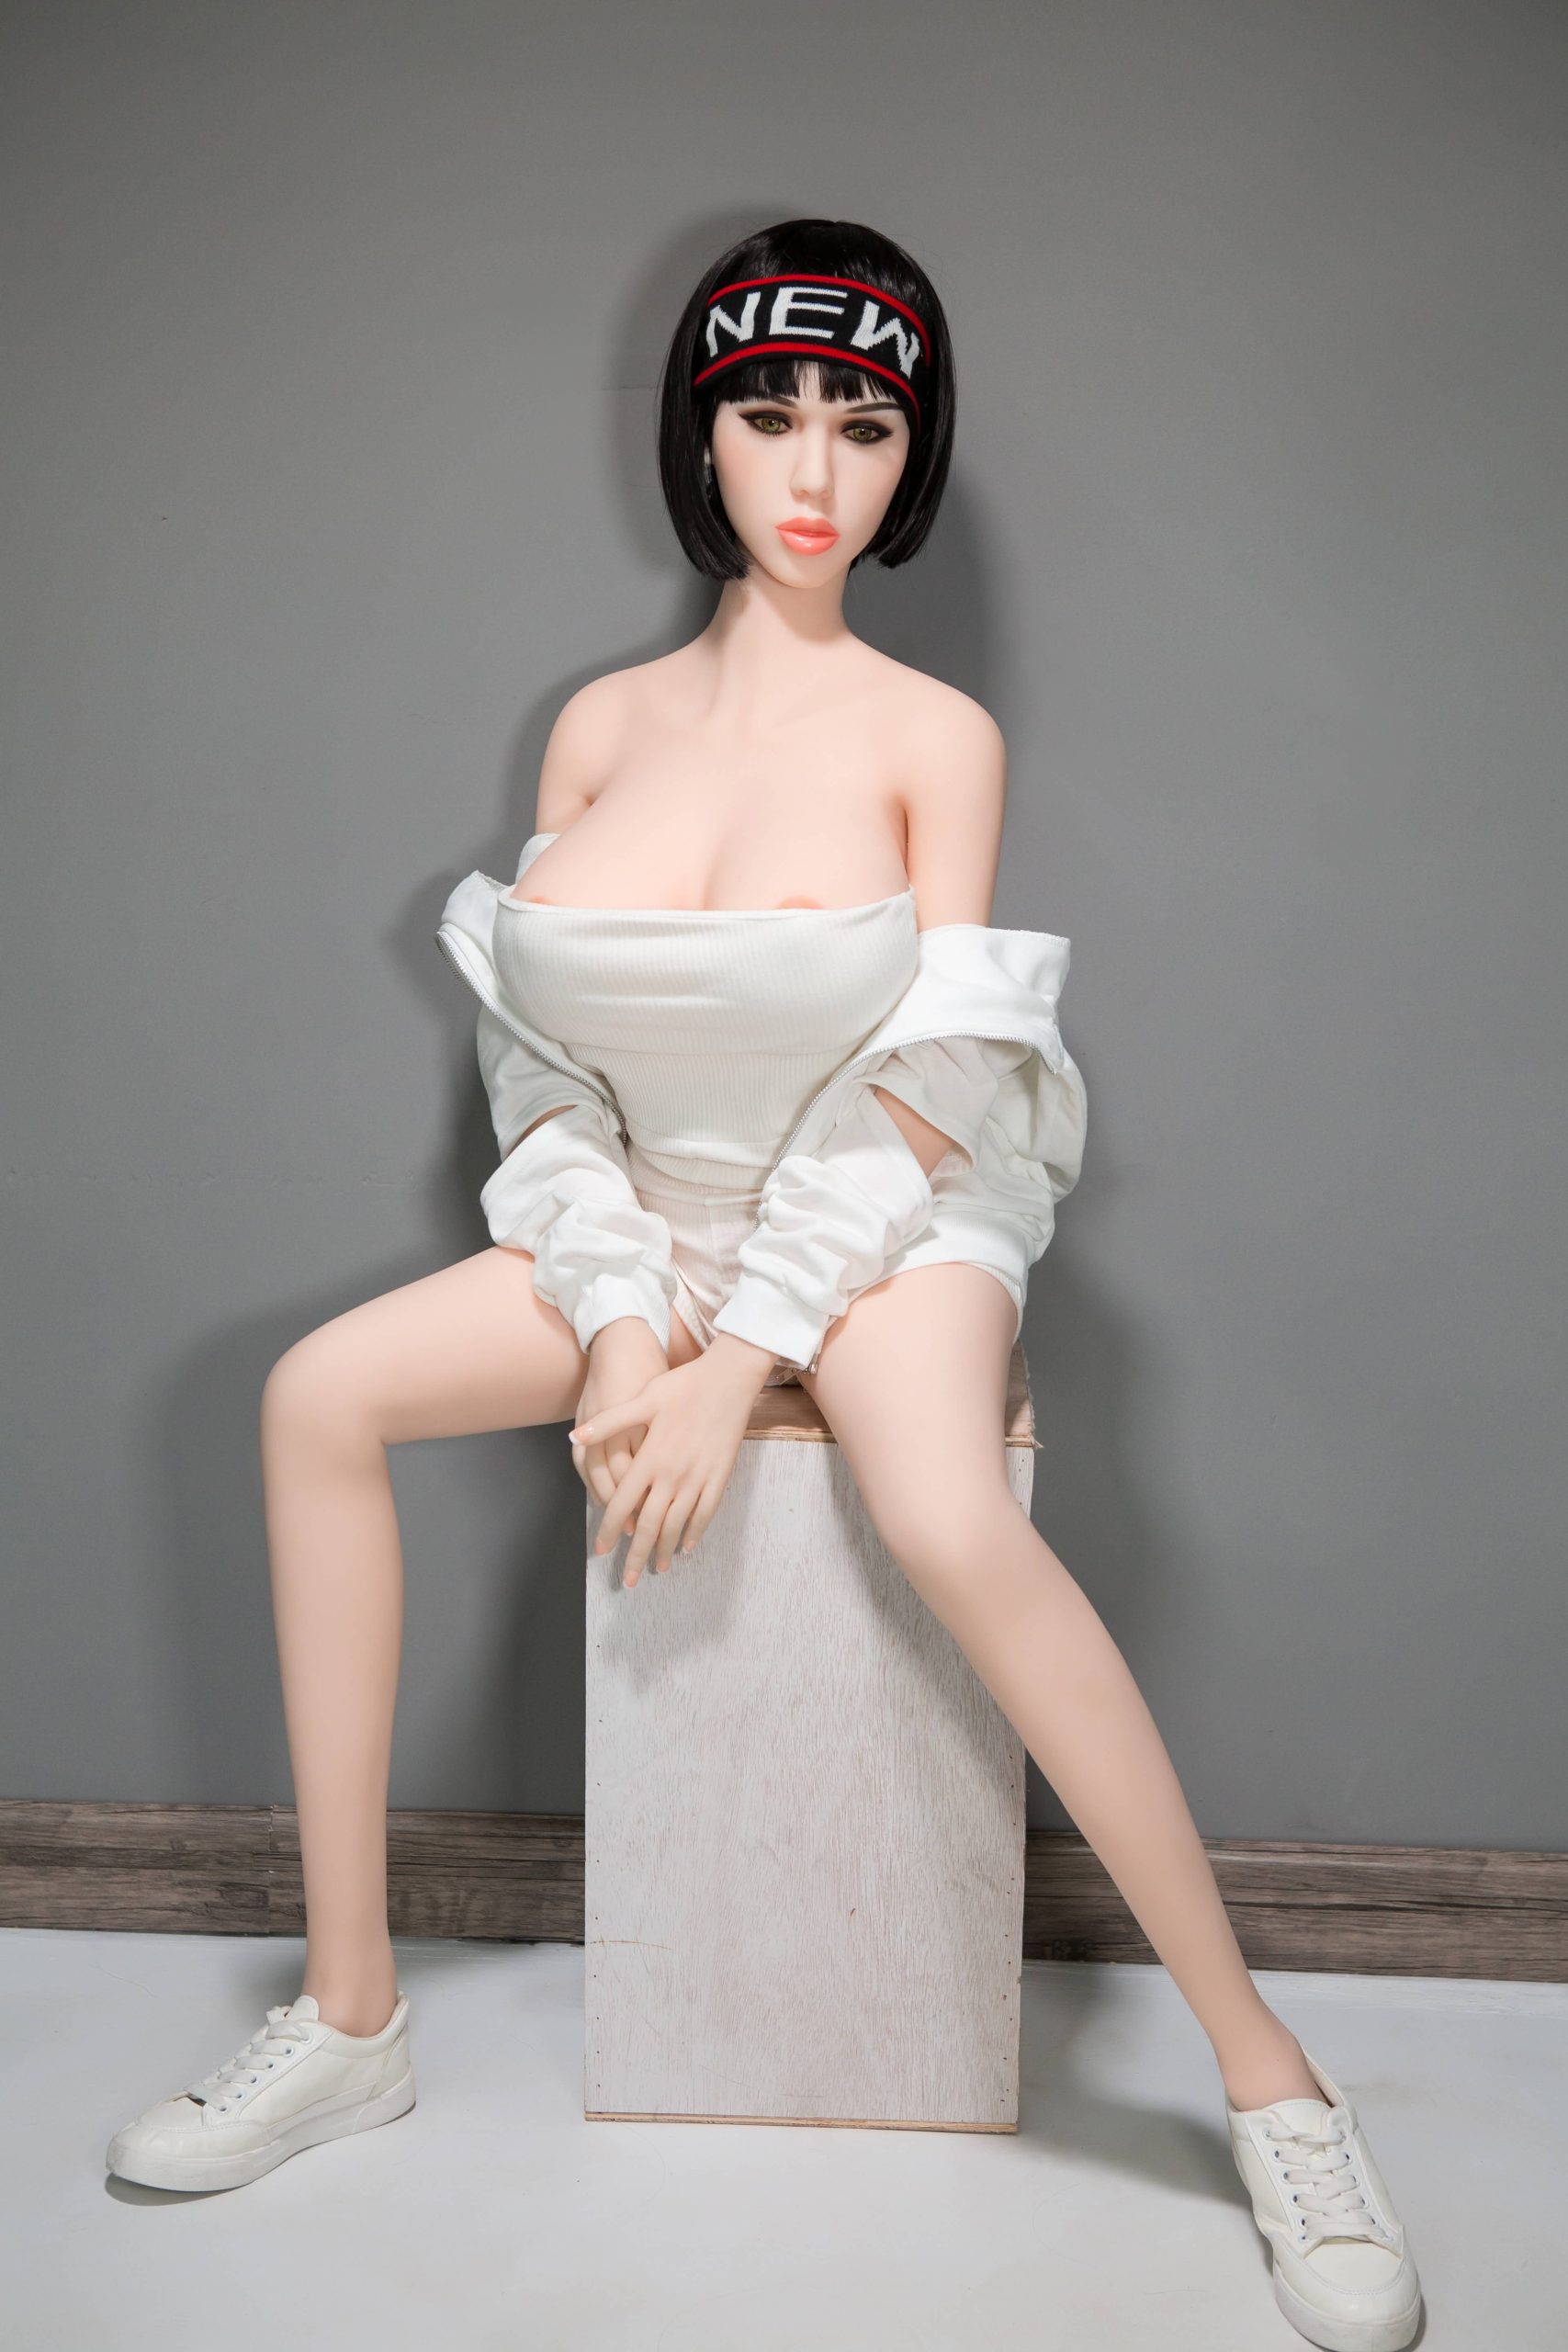 "Realistic silicone sex dolls for adults"